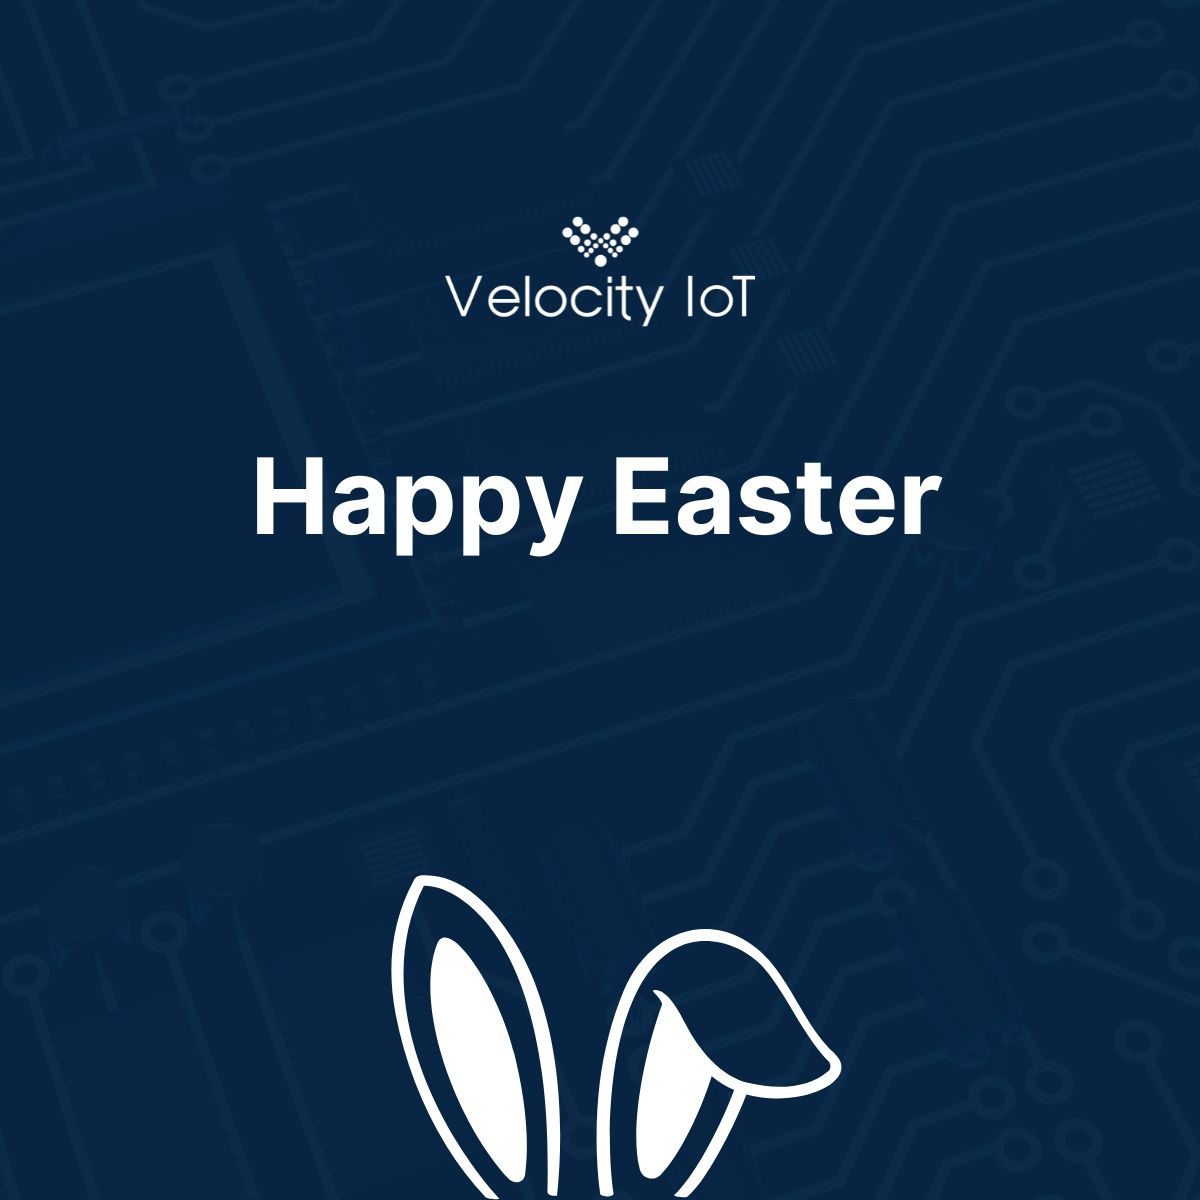 Wishing a joyful Easter to all those celebrating! May your day be filled with happiness, peace, and love.

#happyeaster #velocityiot